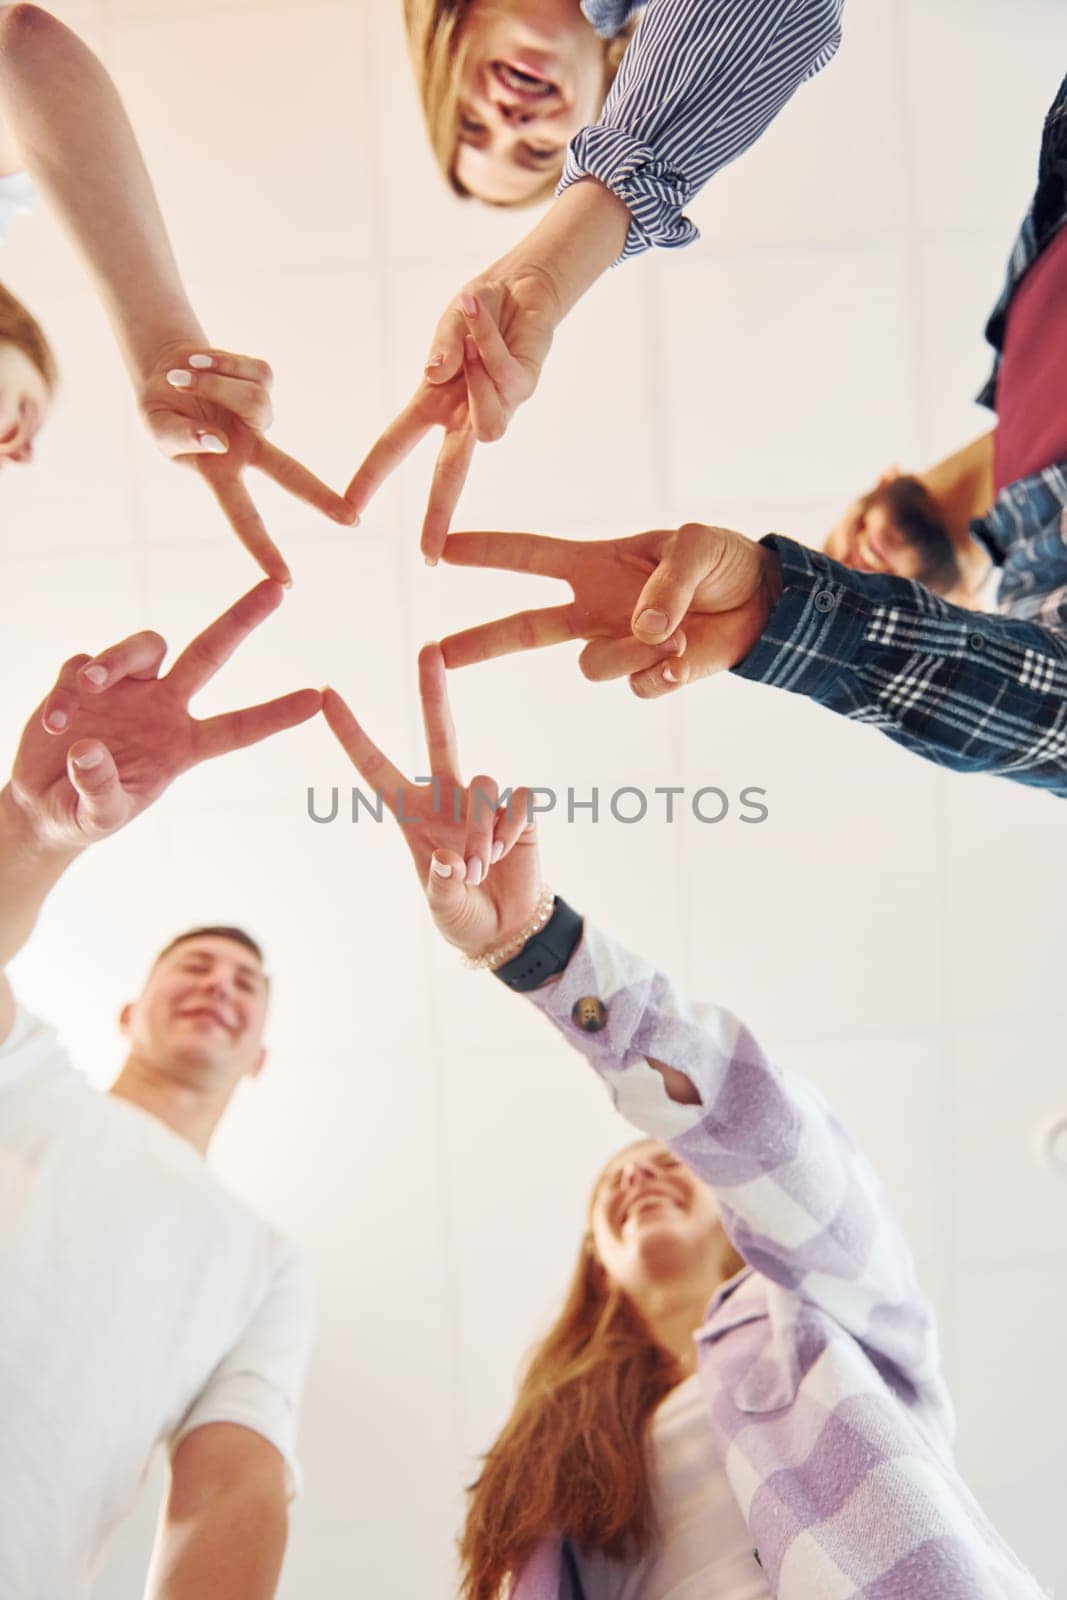 Making gesture by hands. Group of friends standing together by Standret